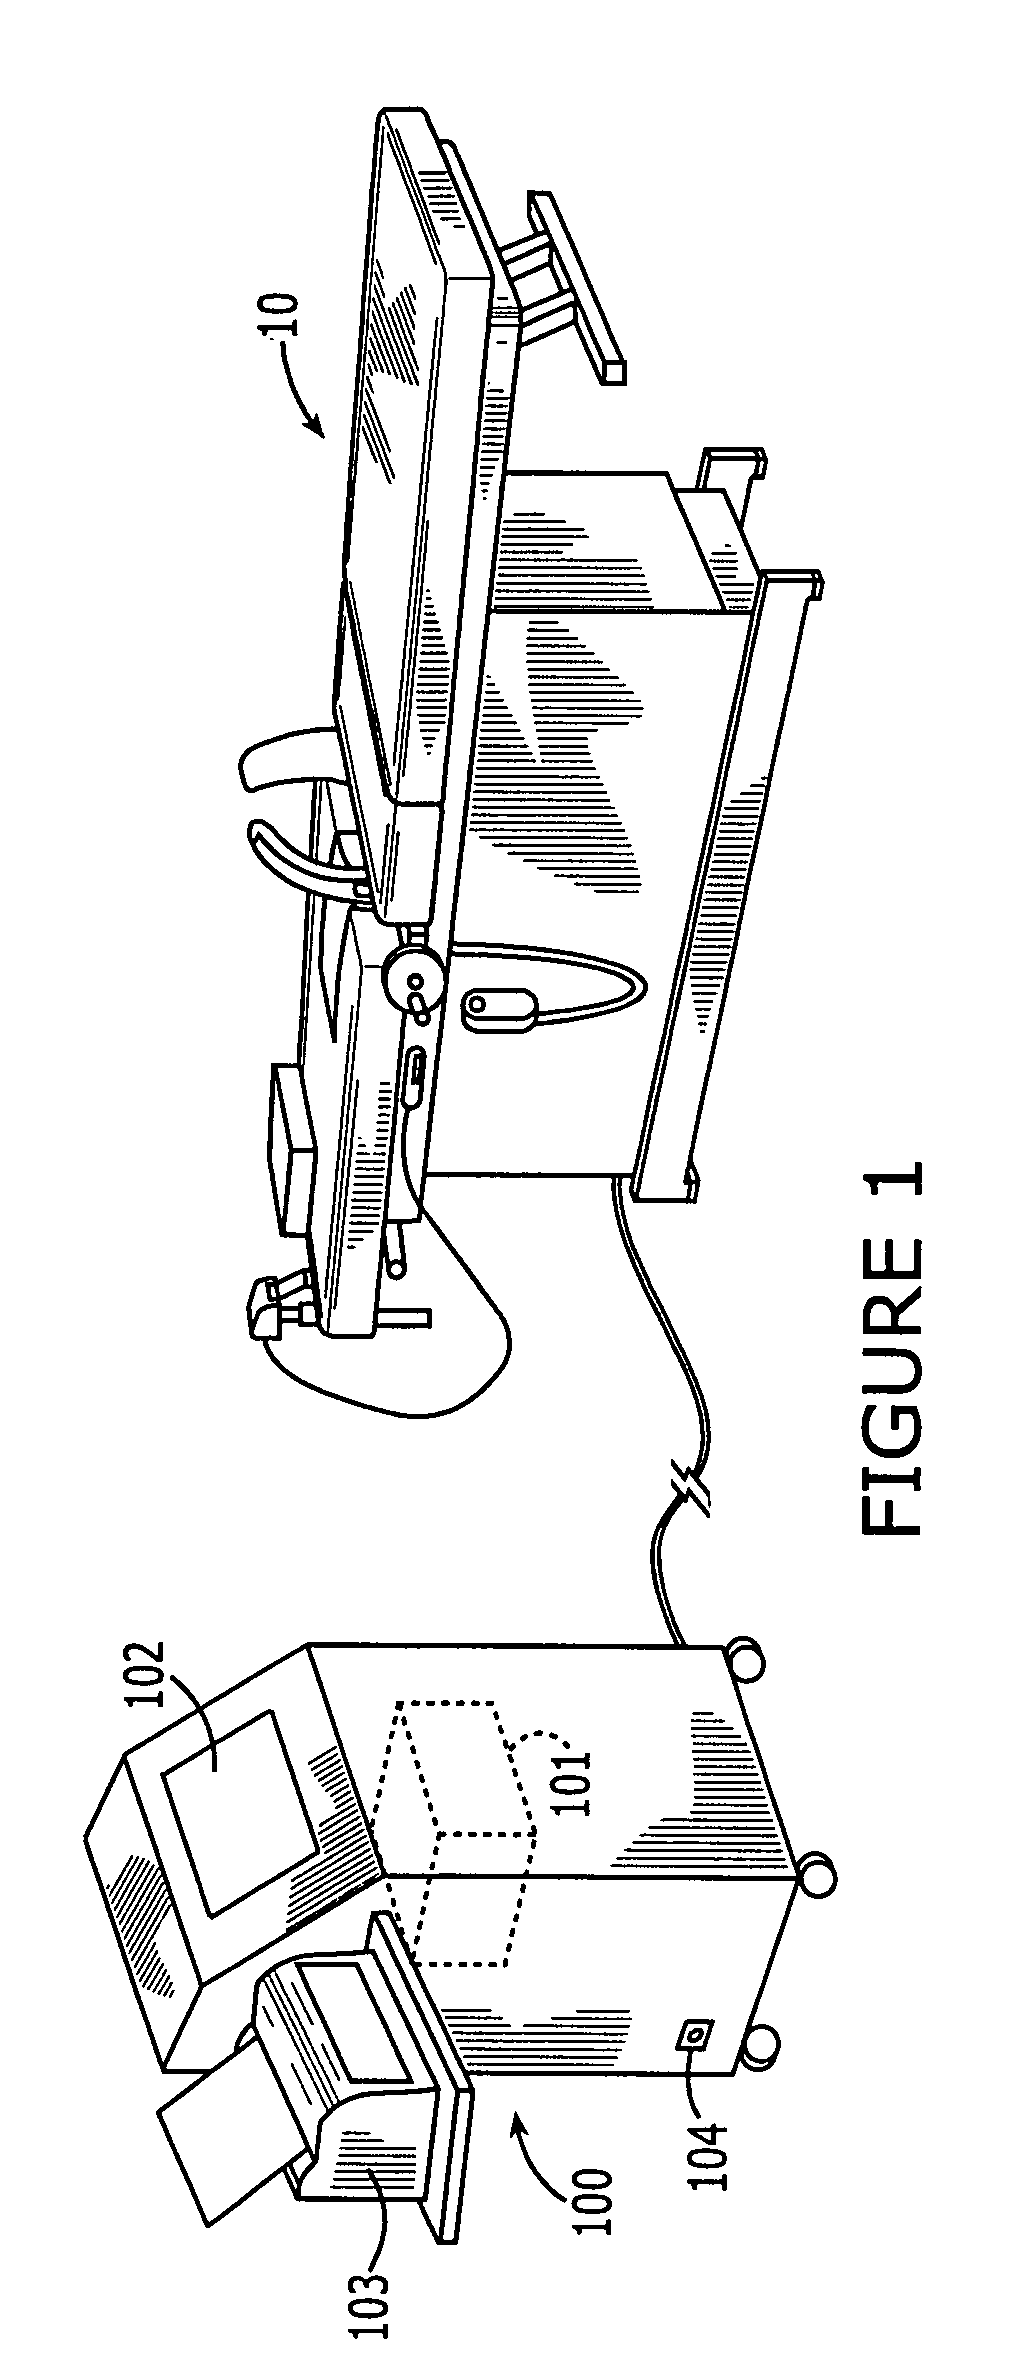 Method and apparatus for therapeutic treatment of back pain